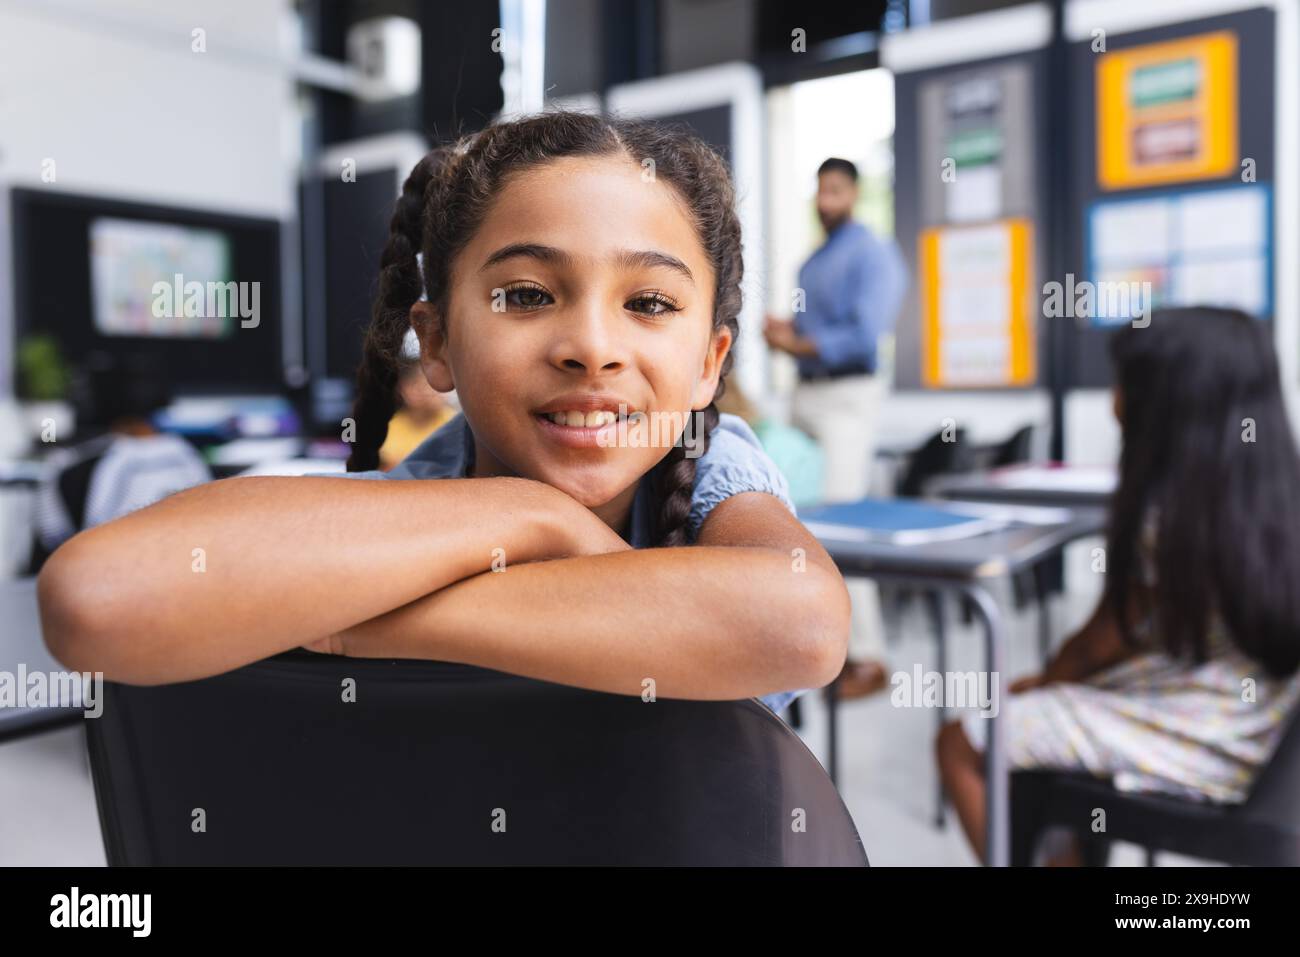 Biracial girl with braided hair smiles in a school classroom Stock Photo